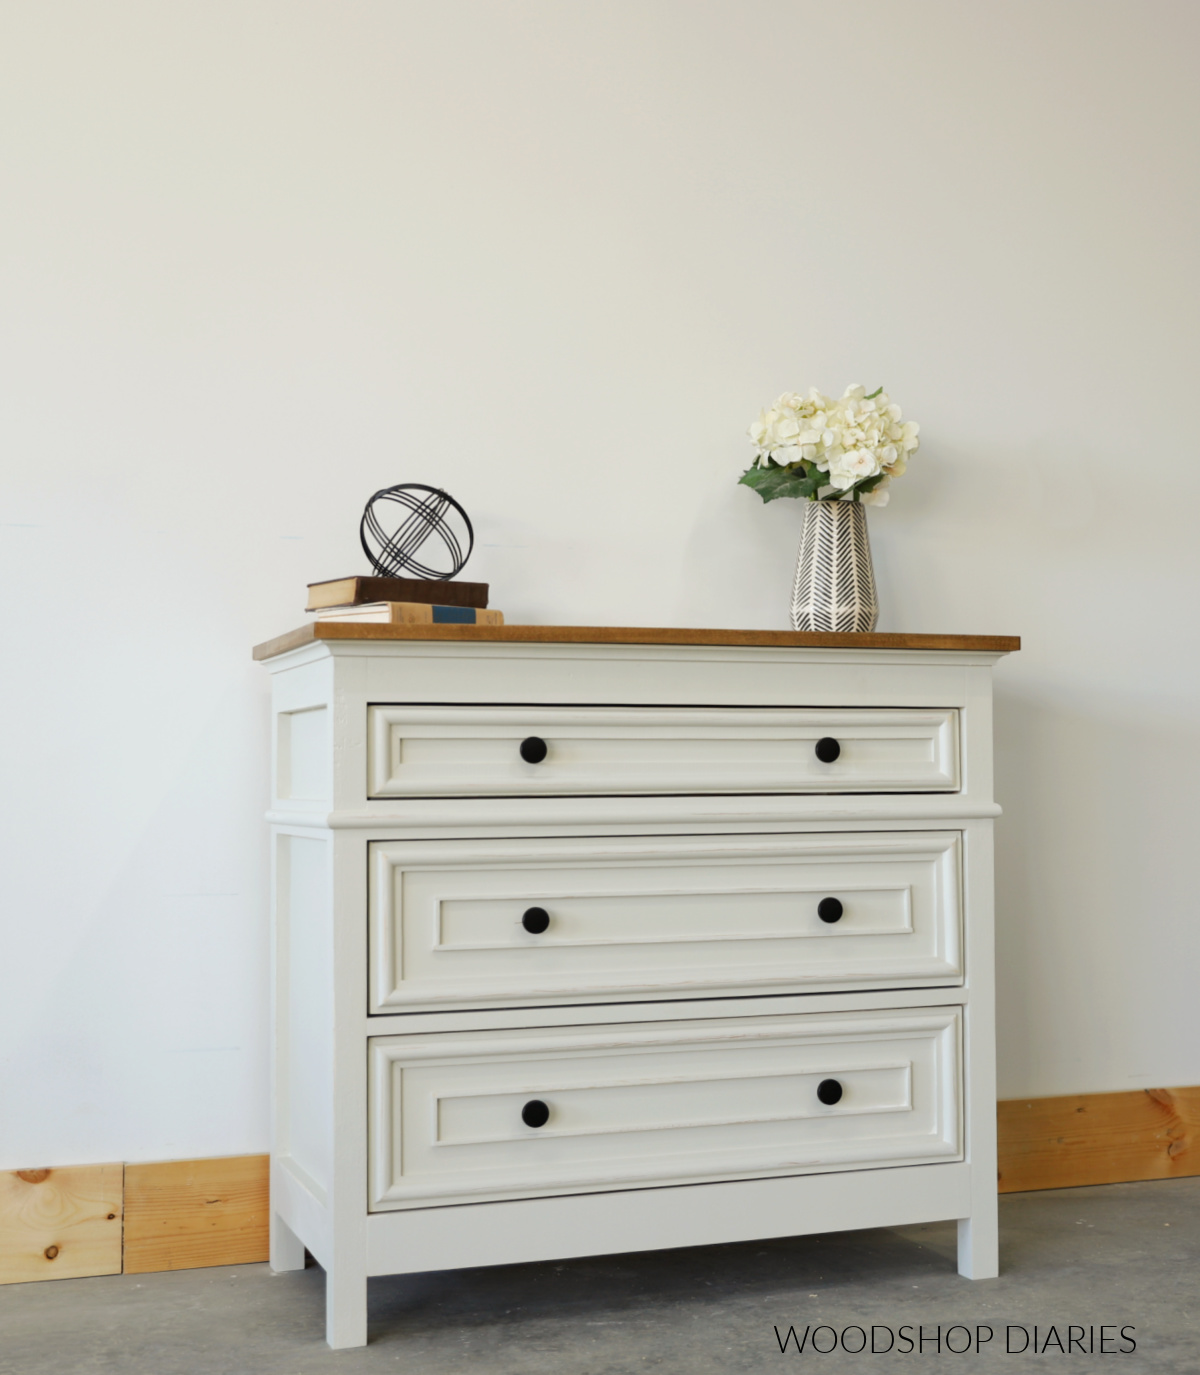 White and wood 3 drawer oversized nightstand with decorative trim along drawer fronts with black knobs